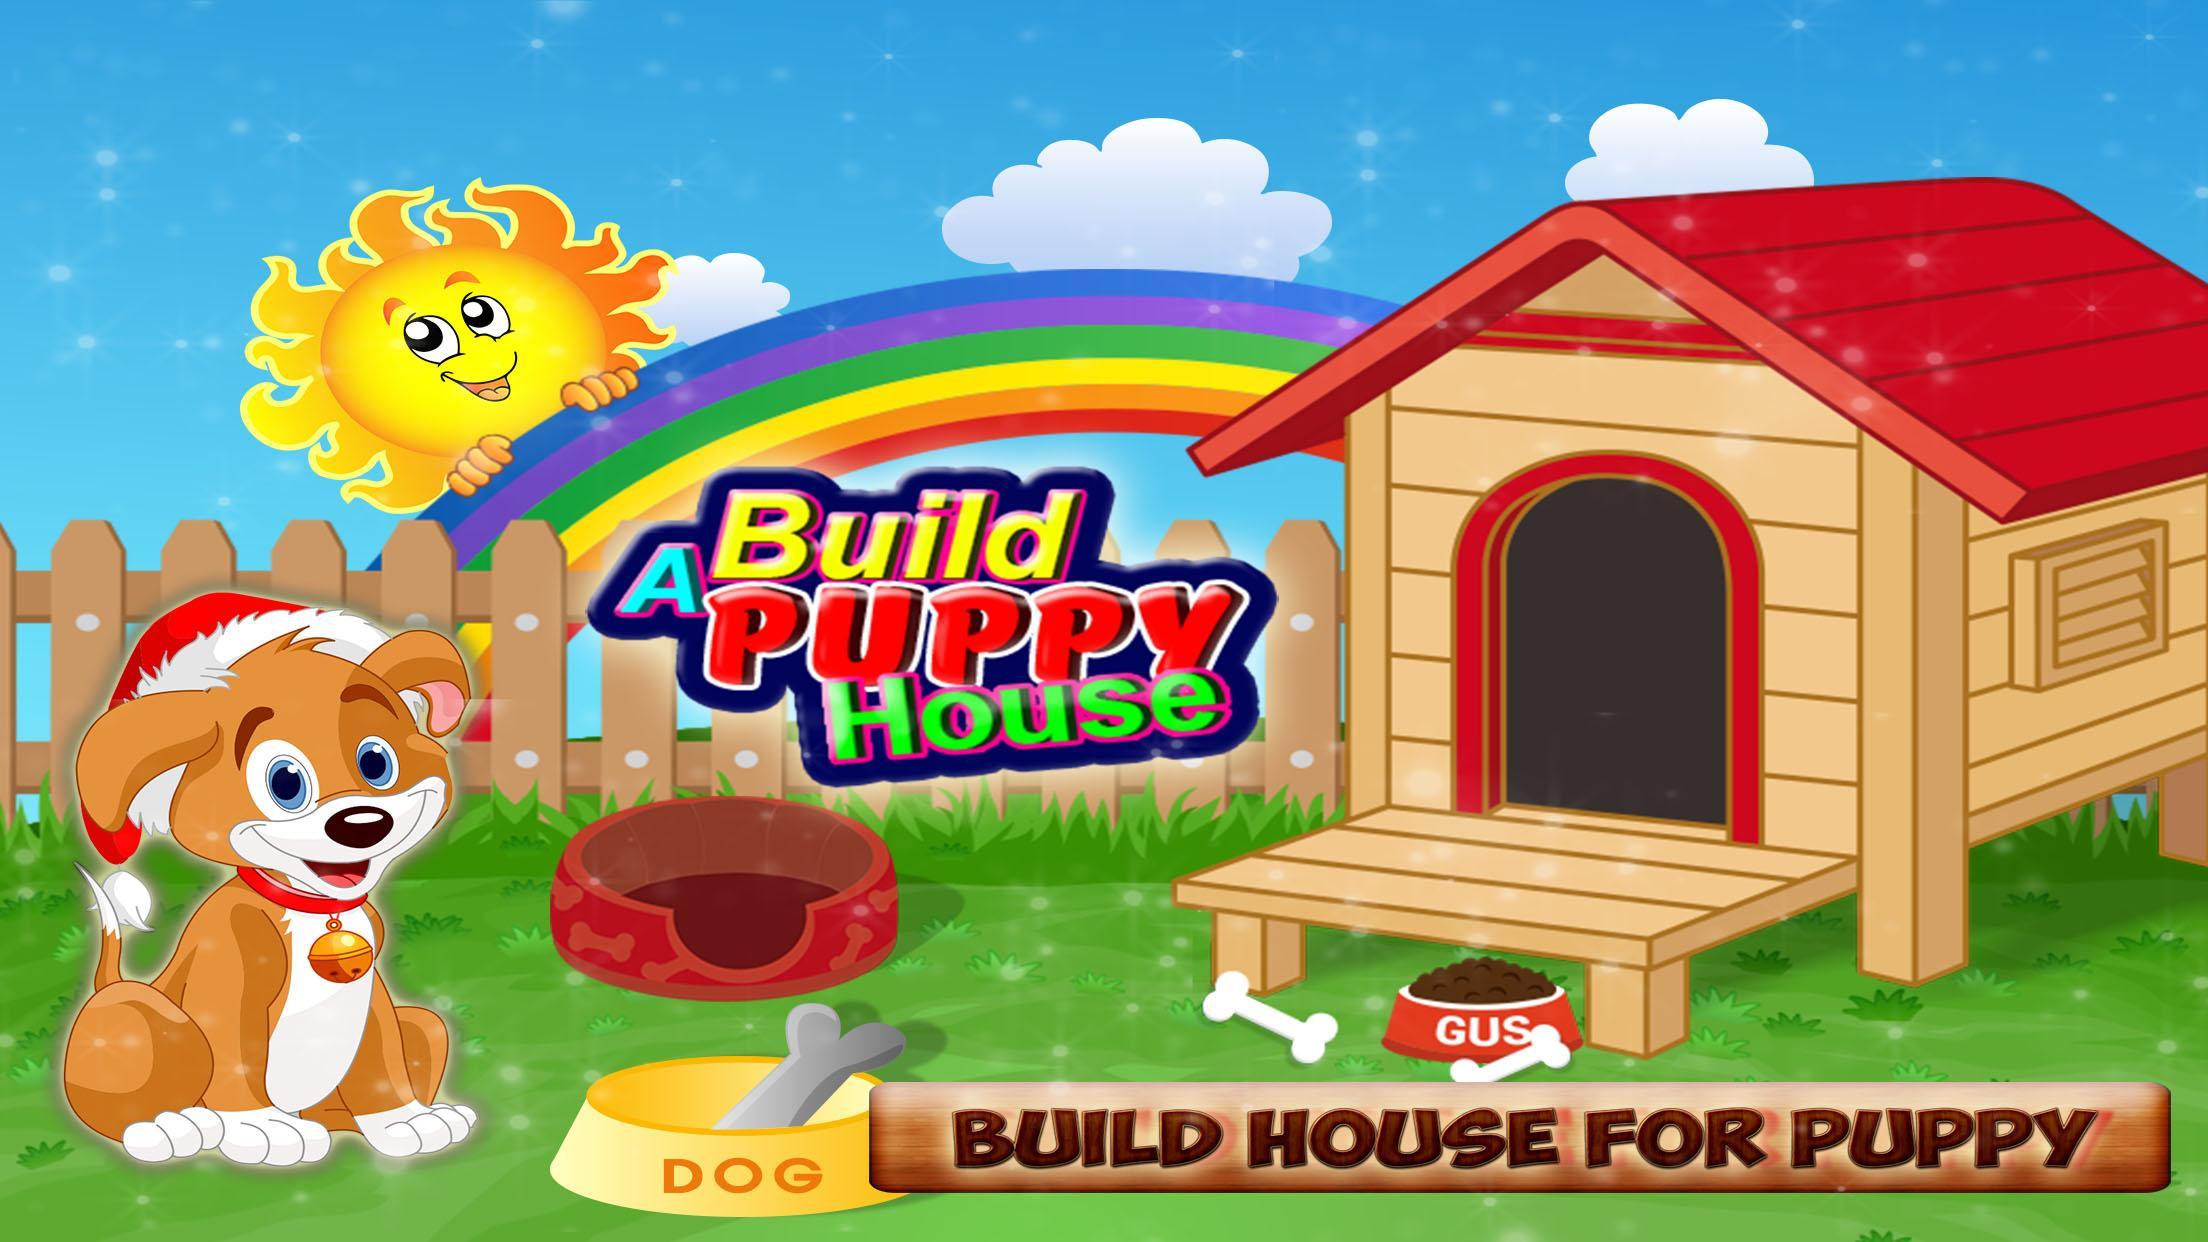 Dog House game. Dog House game: Pet Home decoration game. Sunny House игра. Dog House game лапка.